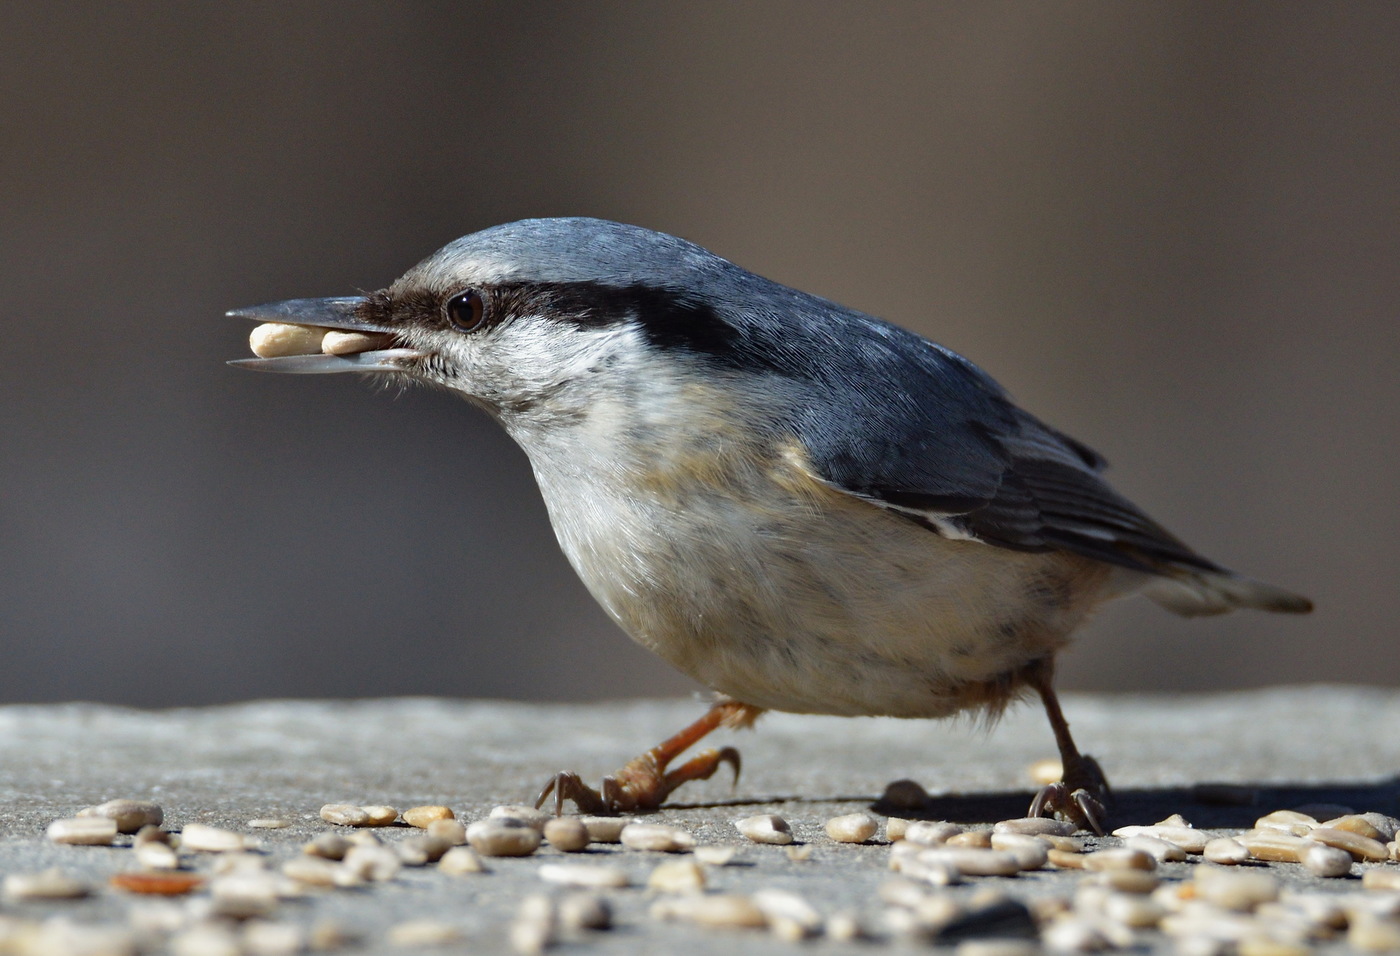 Nuthatch in the feeder collects grain